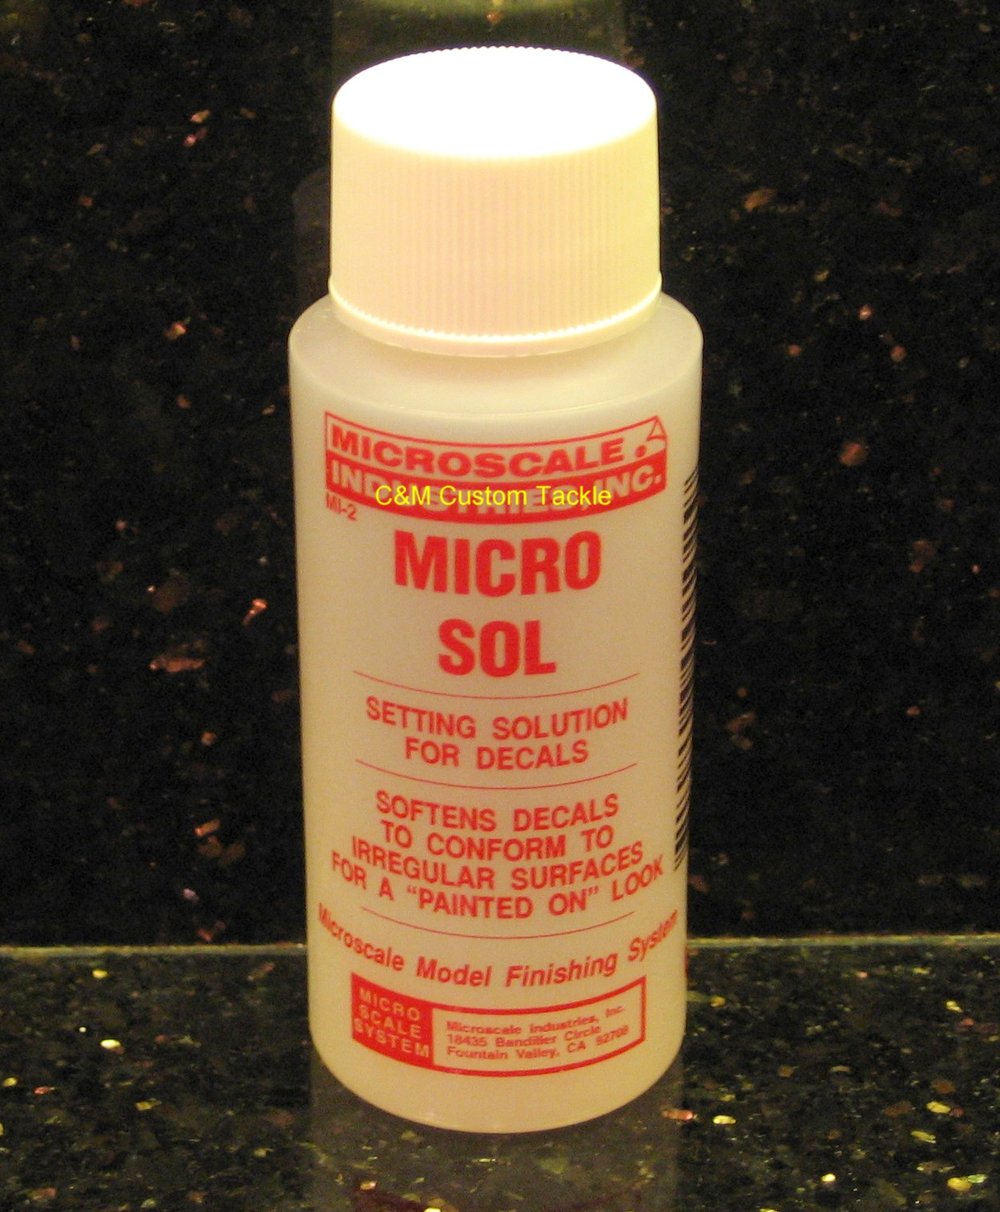 Micro Sol / setting - softner solution for decals 